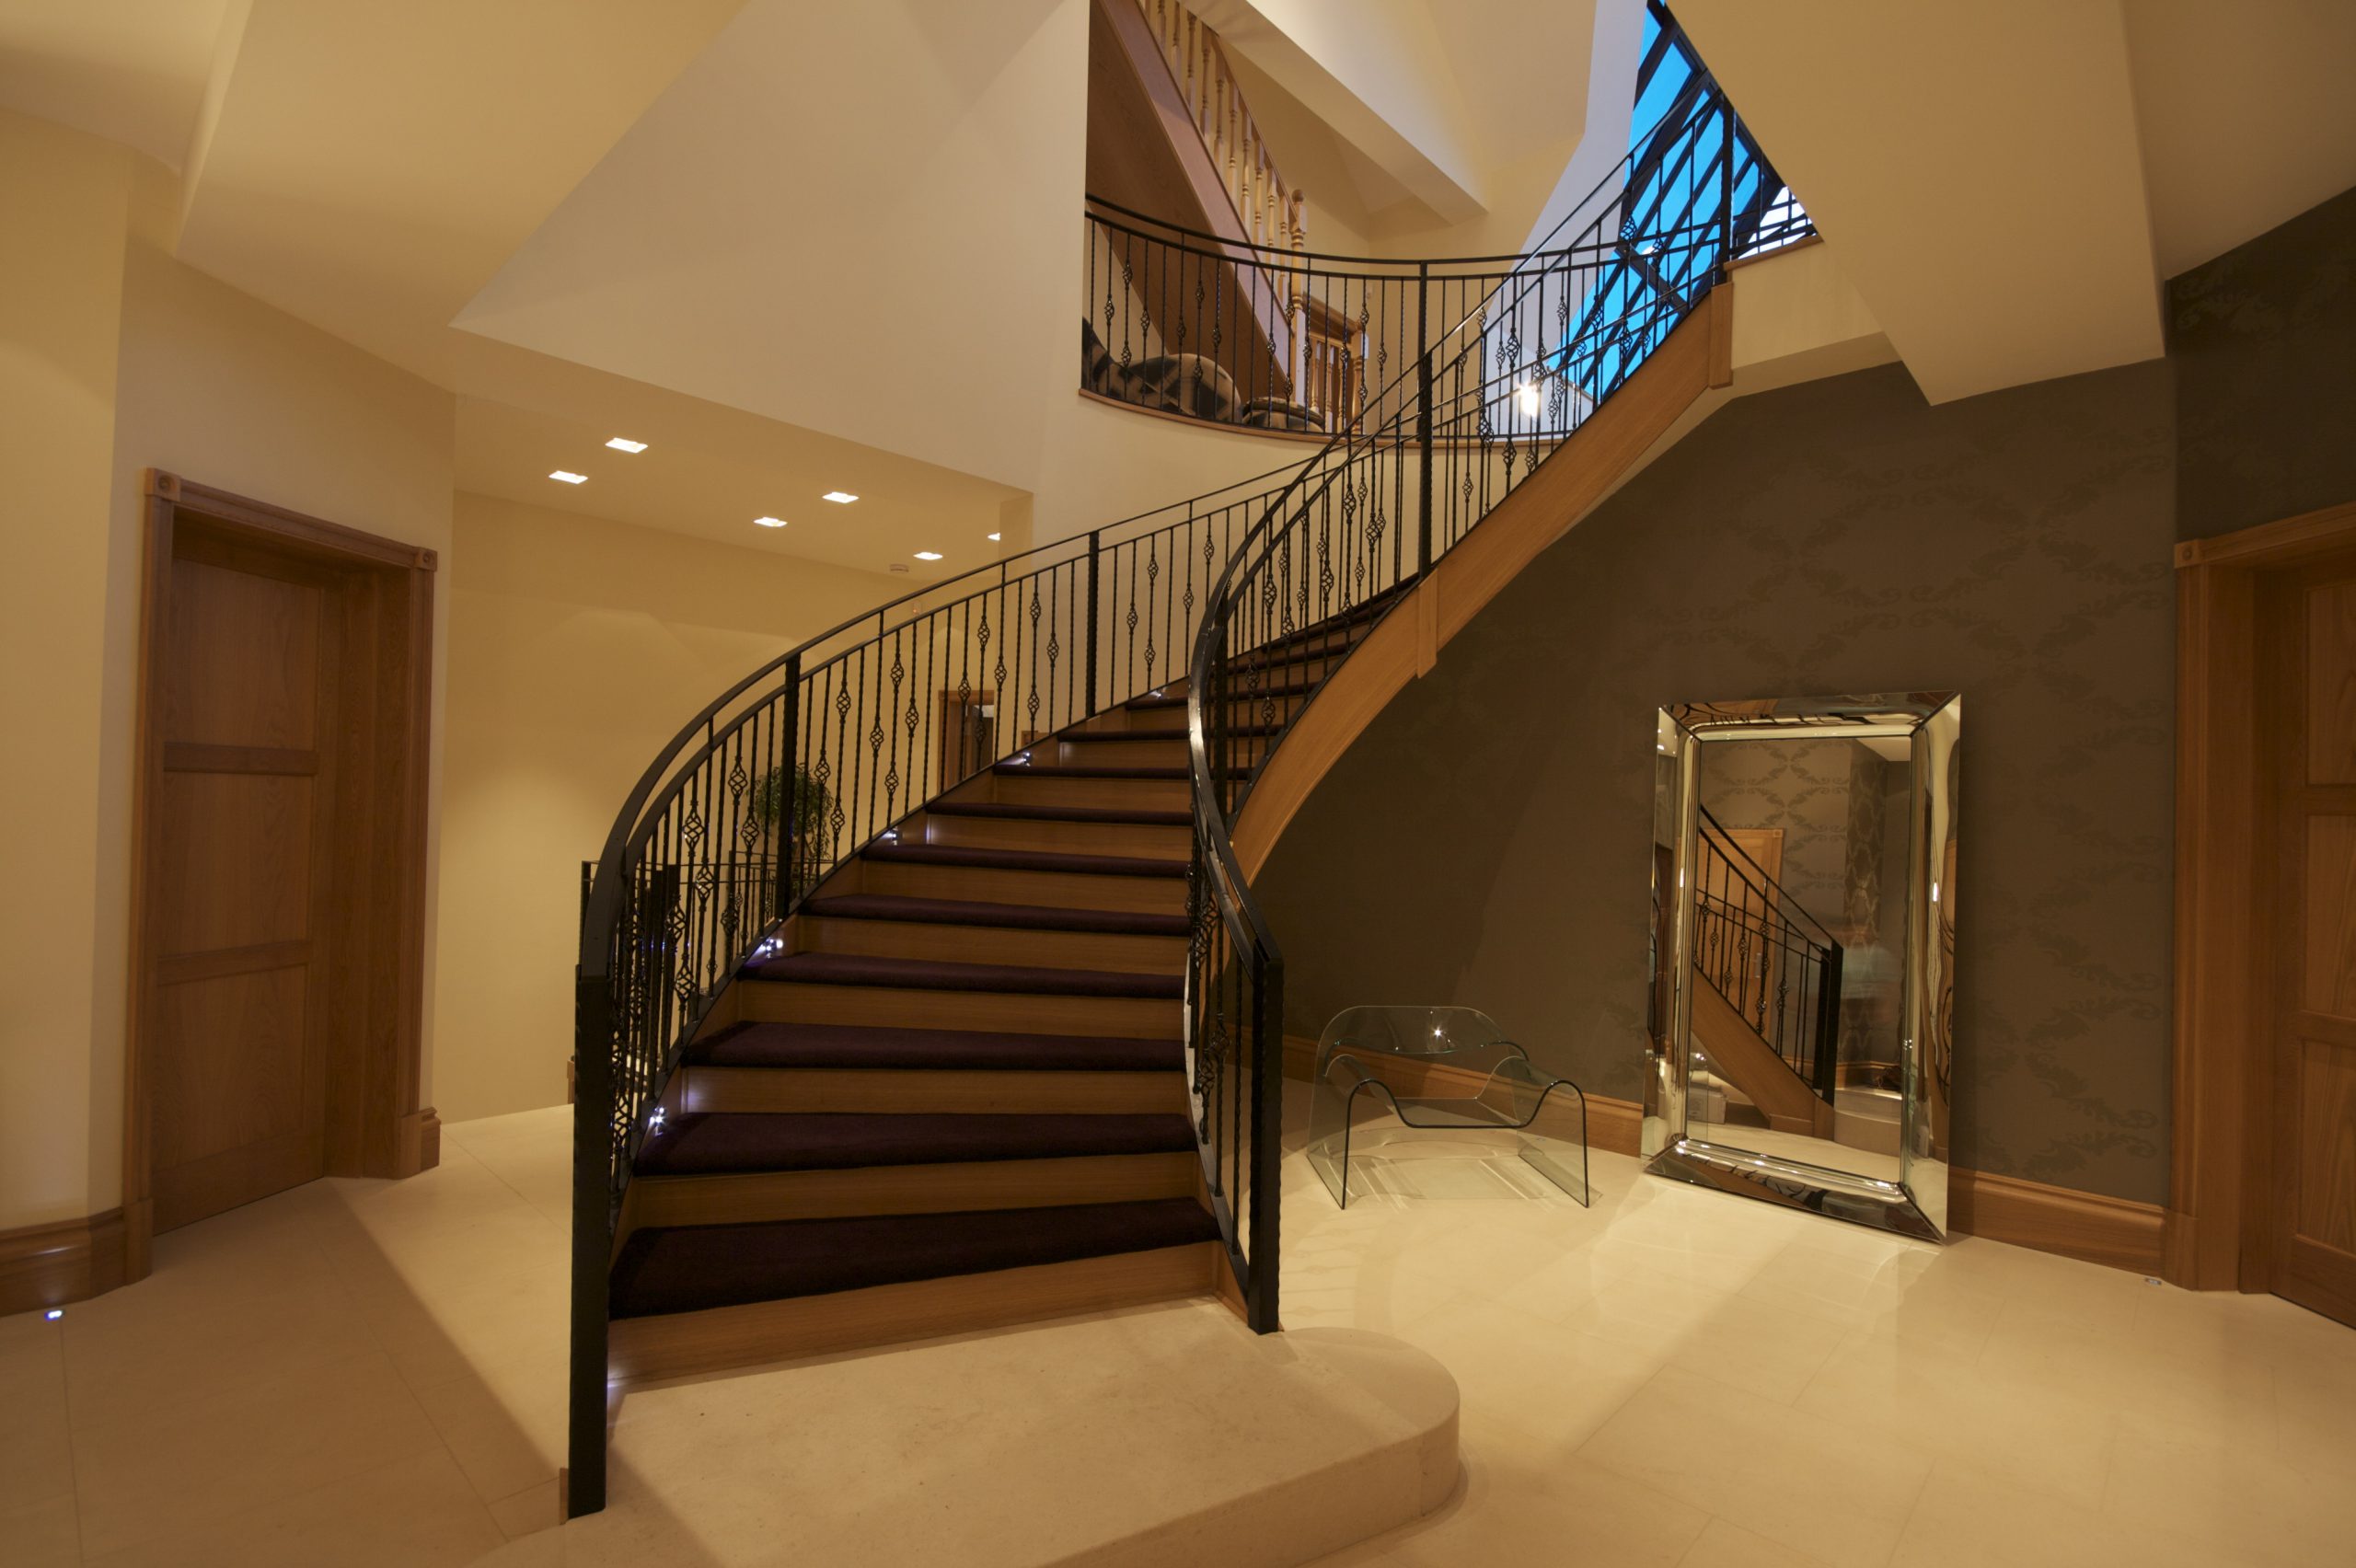 Staircase with smart home lighting